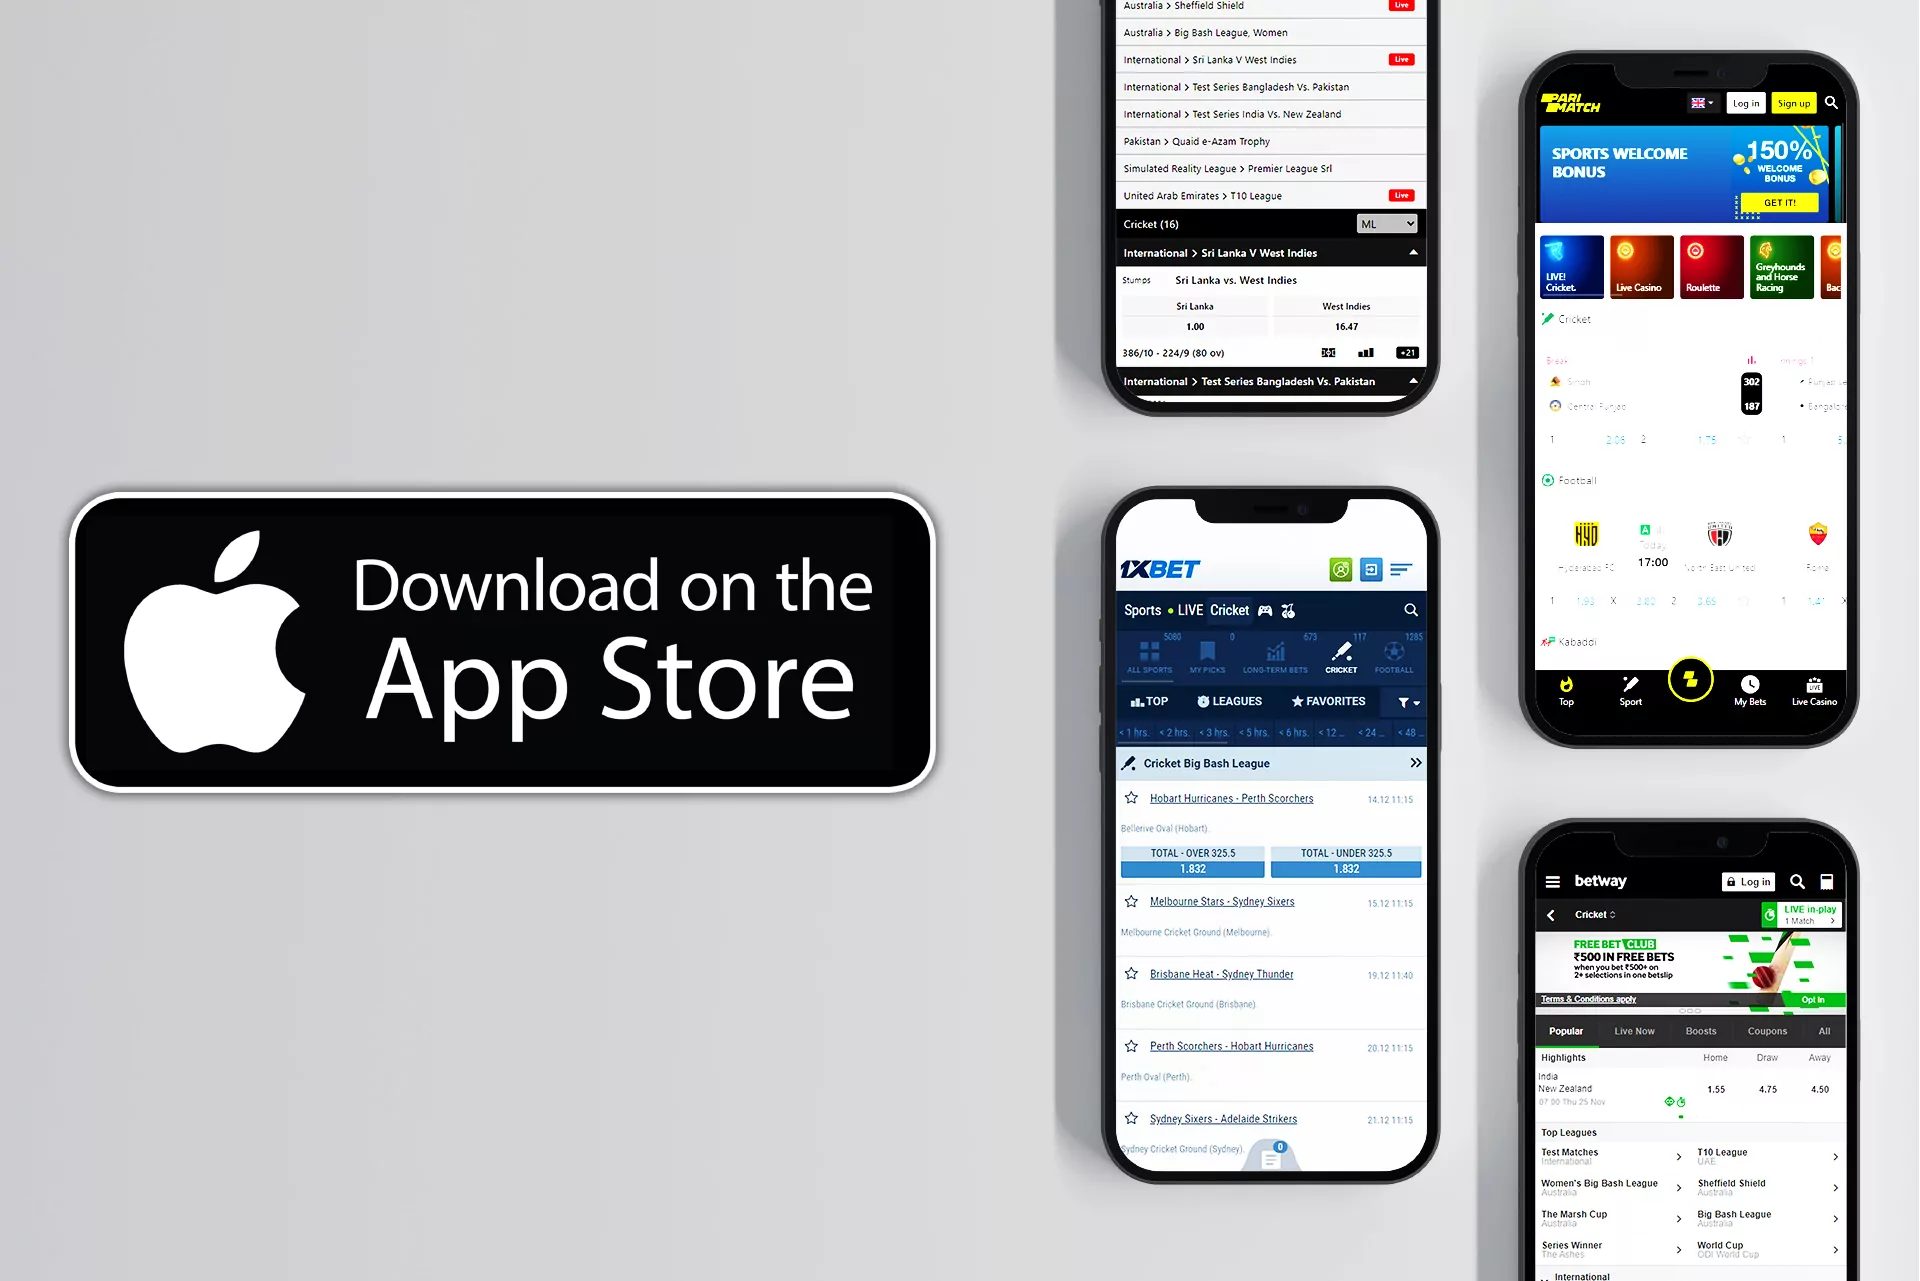 The app for the iOS platform usually is located on the App Store.